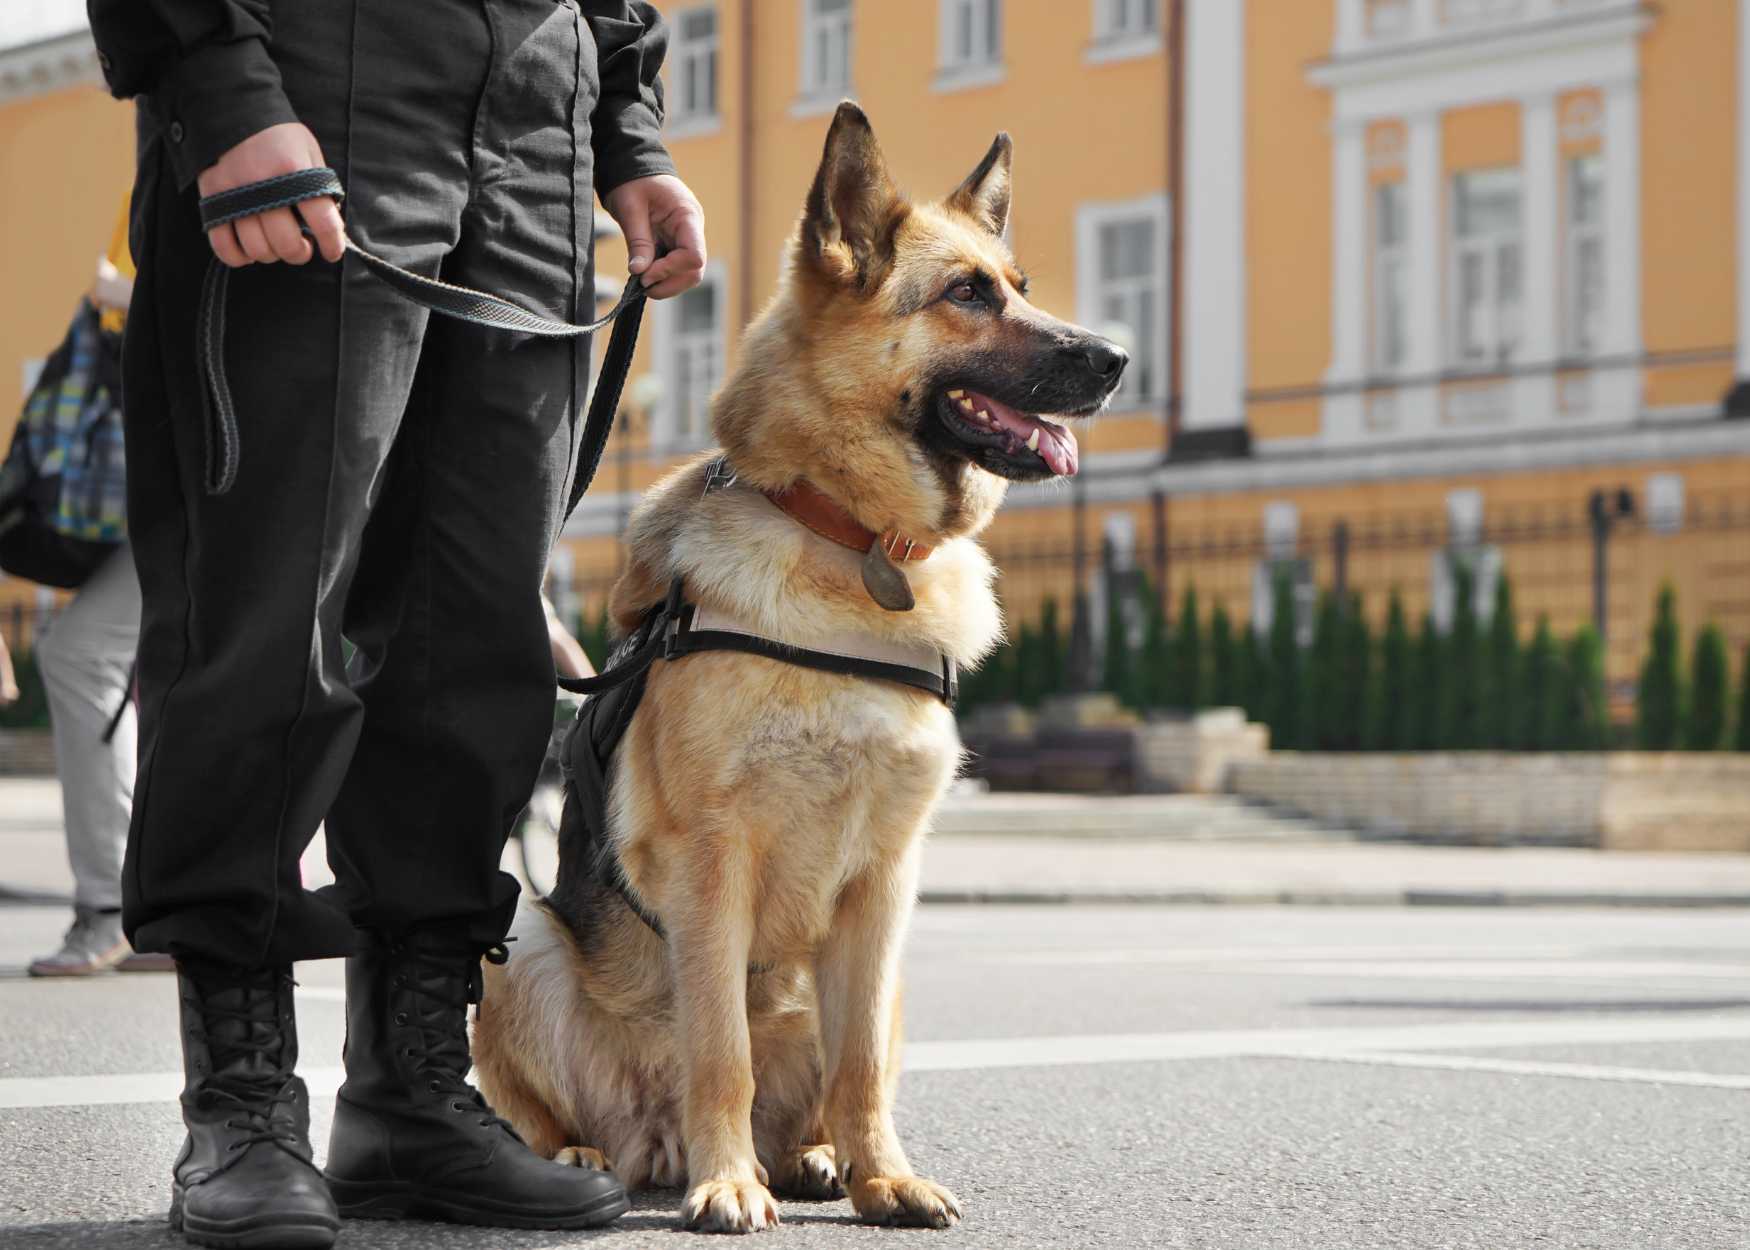 A police dog sits next to its handler